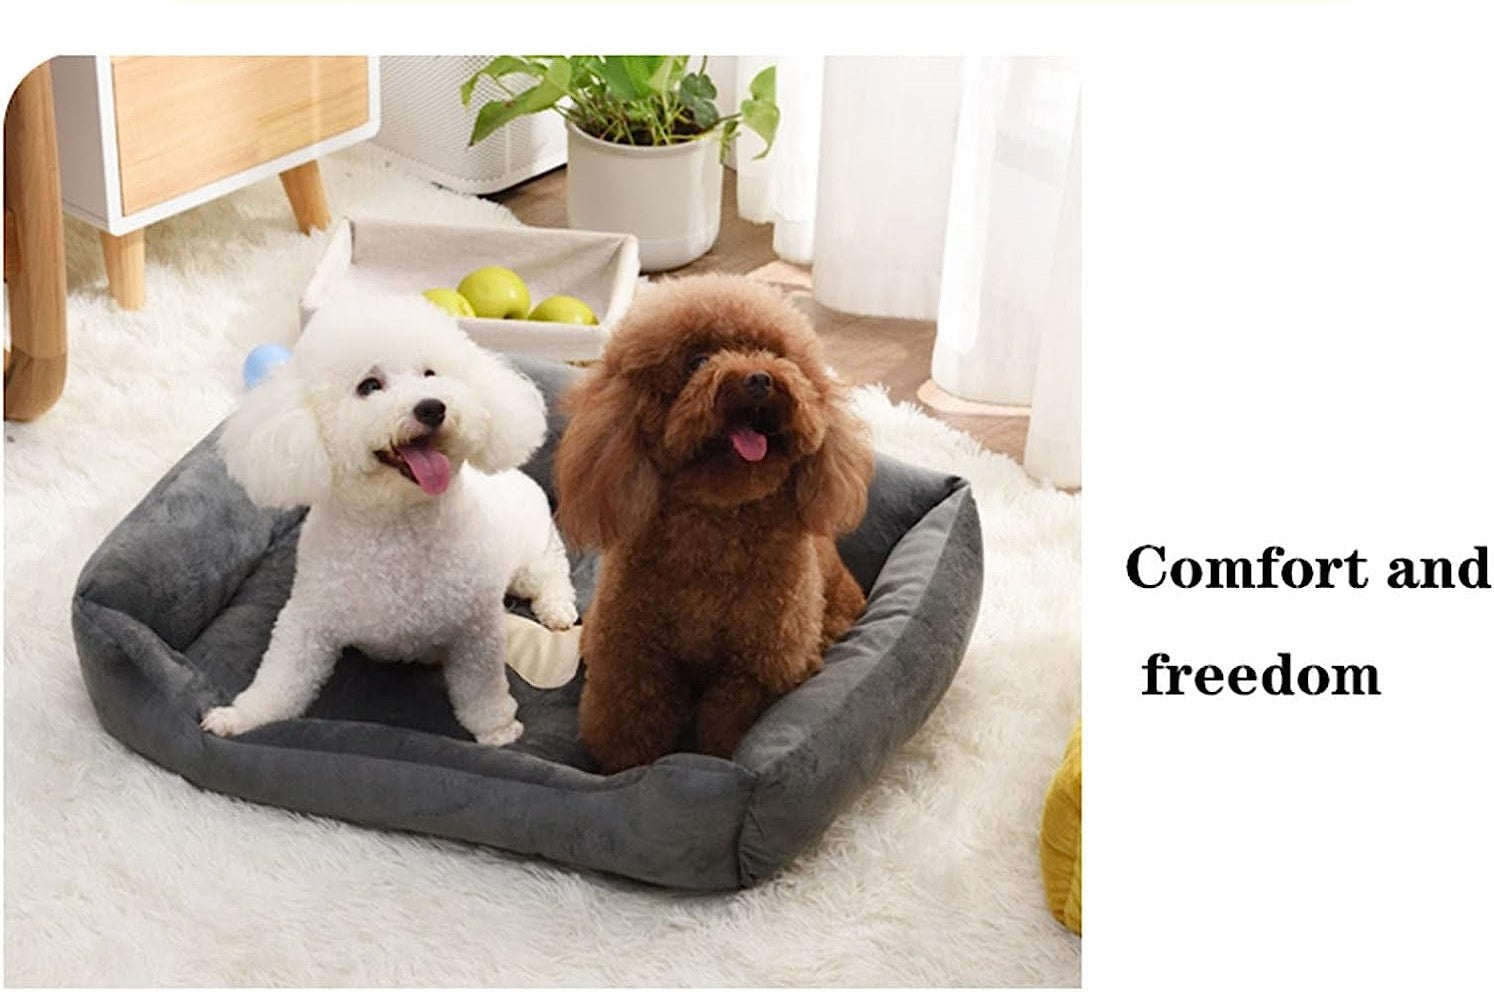 Super Soft Dog Bed with Waterproof Bottom - Warm Bed/Sofa For Dog & Cat - Cream & Red